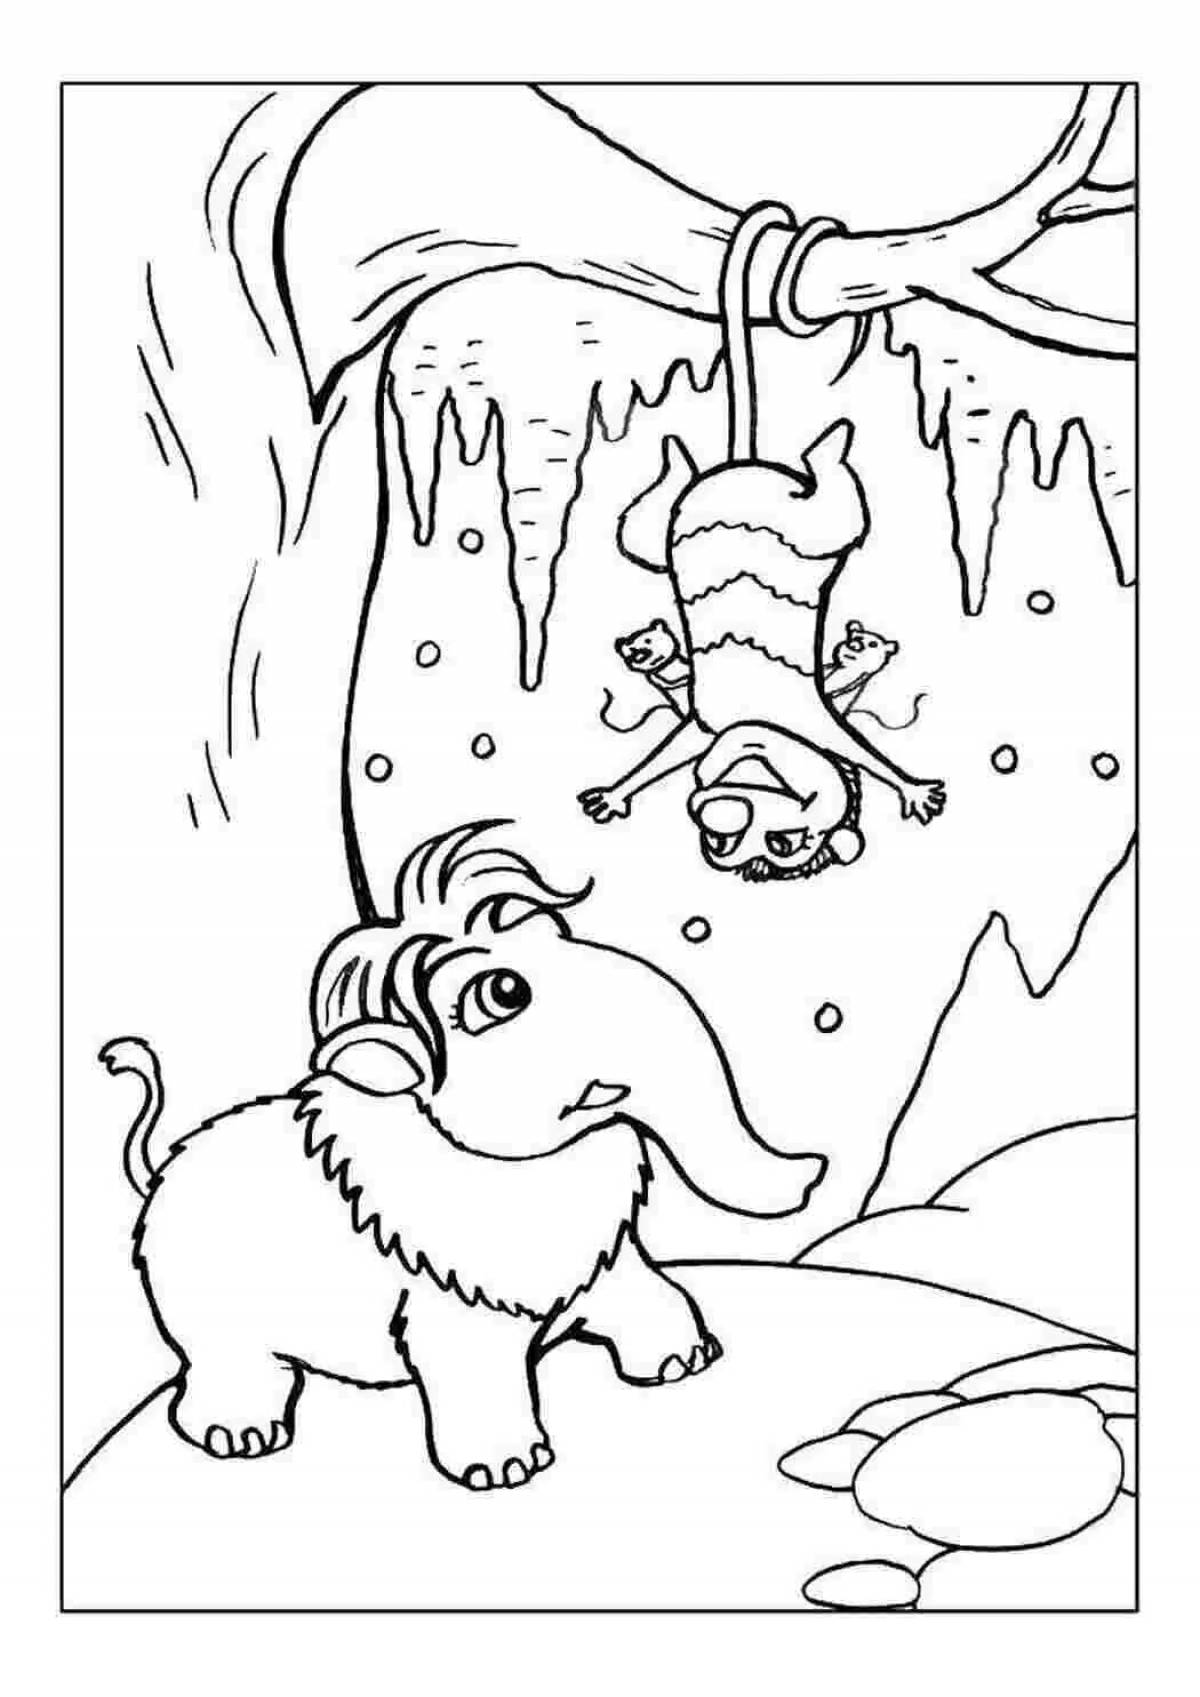 Manny's amazing ice age coloring book